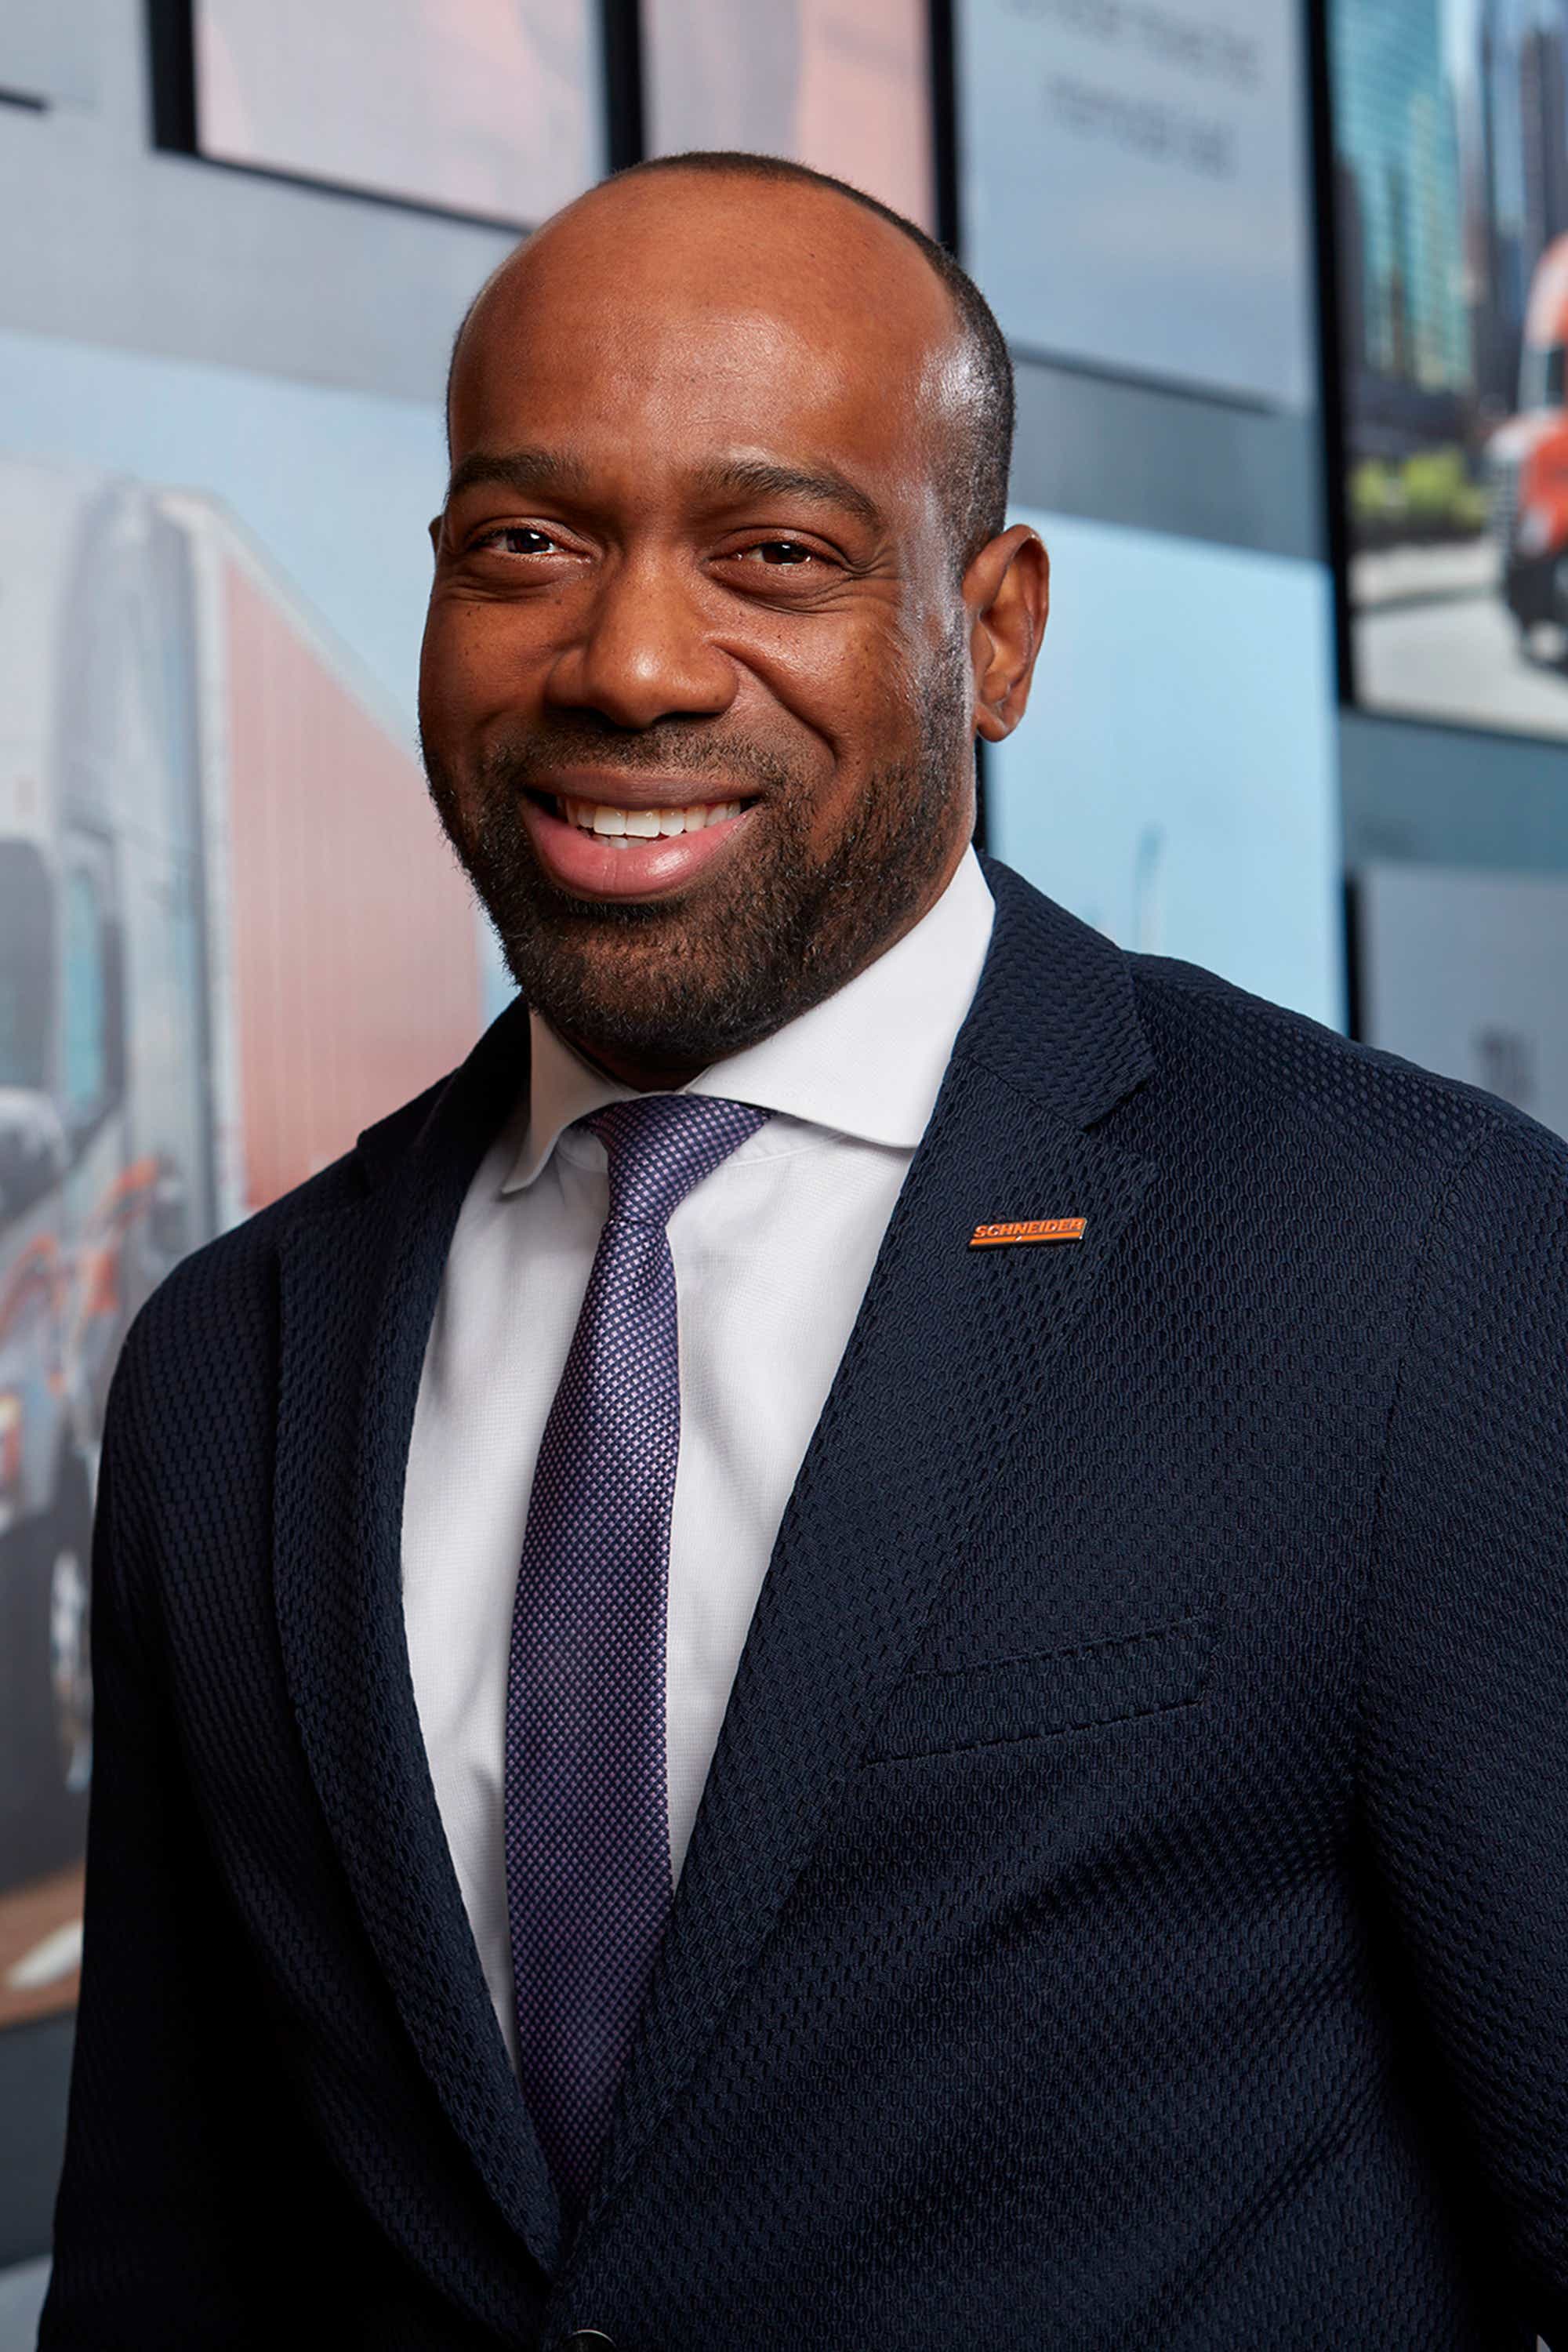 Darrell Campbell, Executive vice president, chief financial officer of Schneider